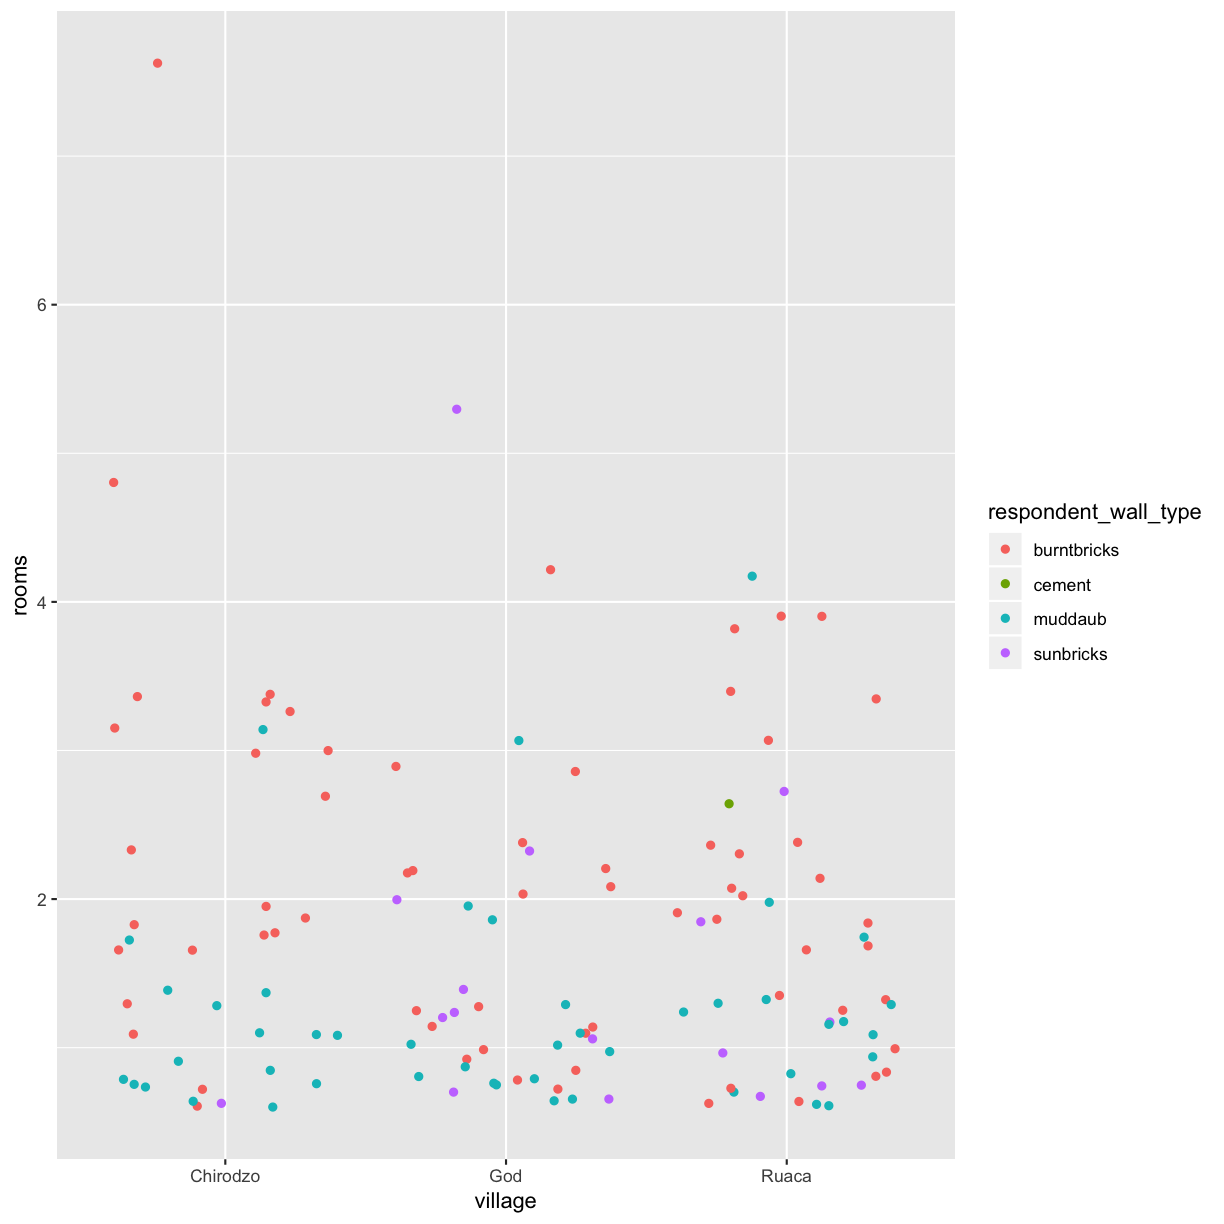 R for Research: Data visualisation with ggplot2